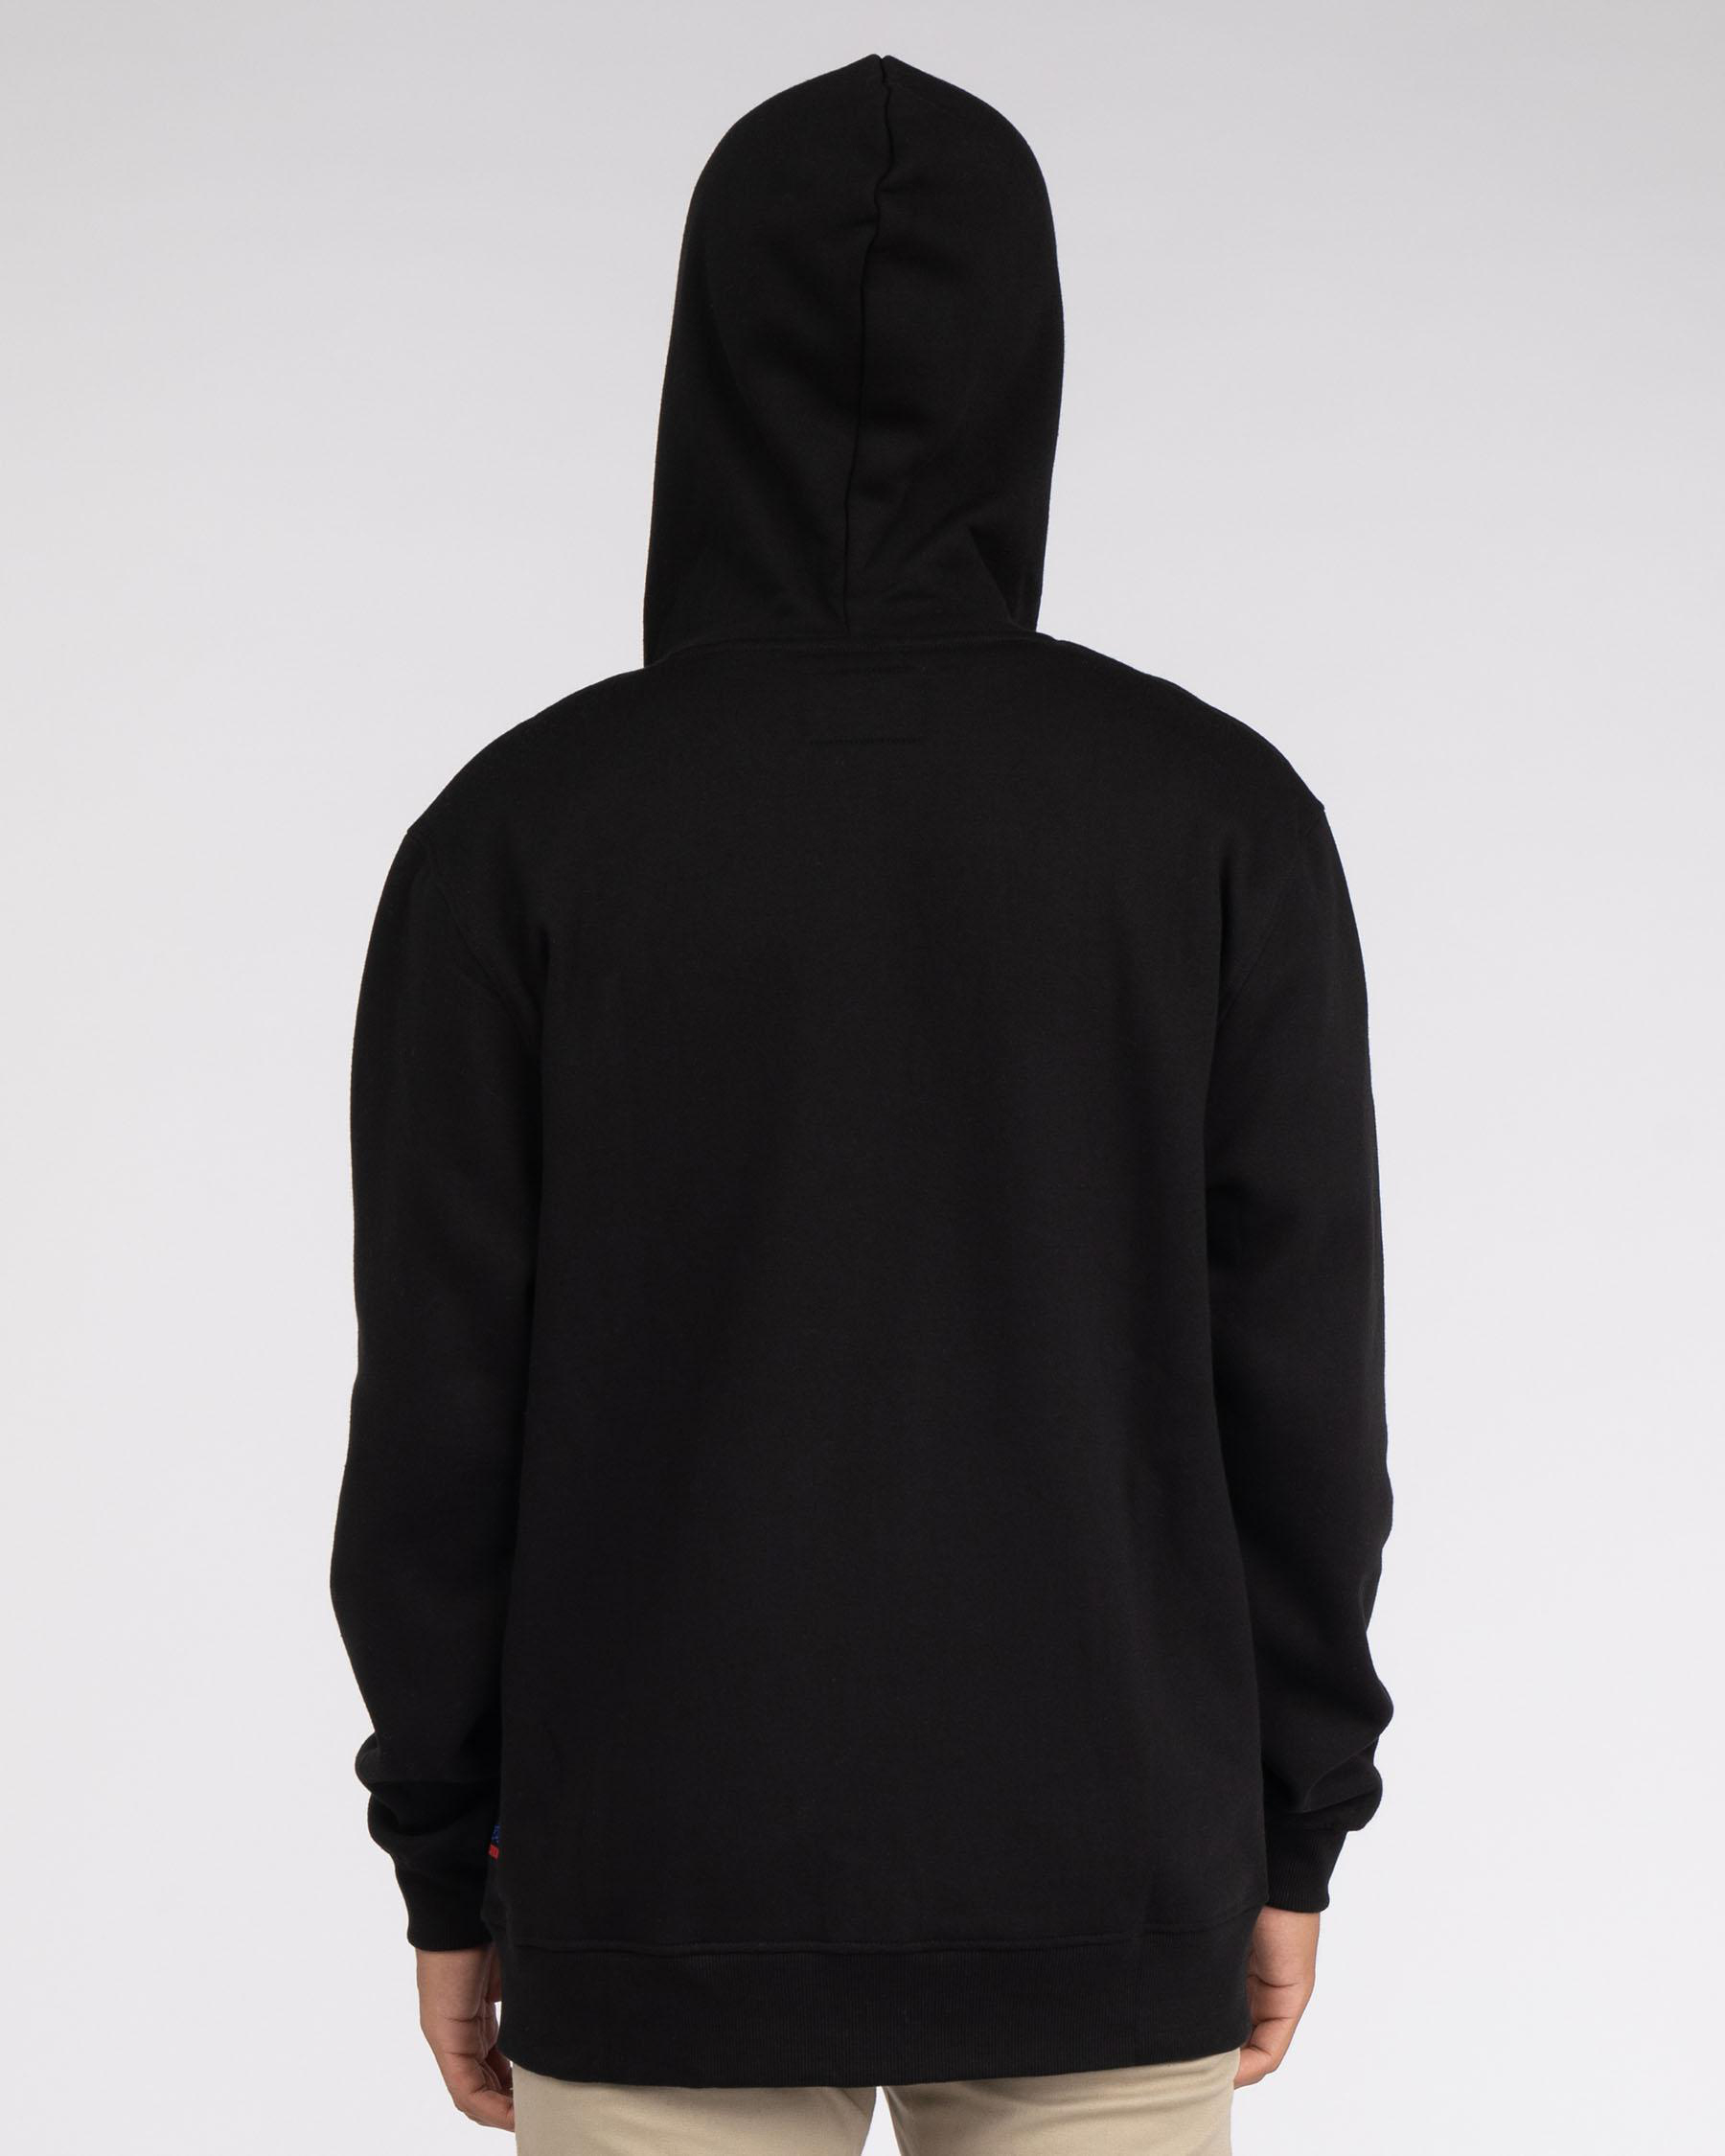 Unit Clapped Hoodie In Black - Fast Shipping & Easy Returns - City ...